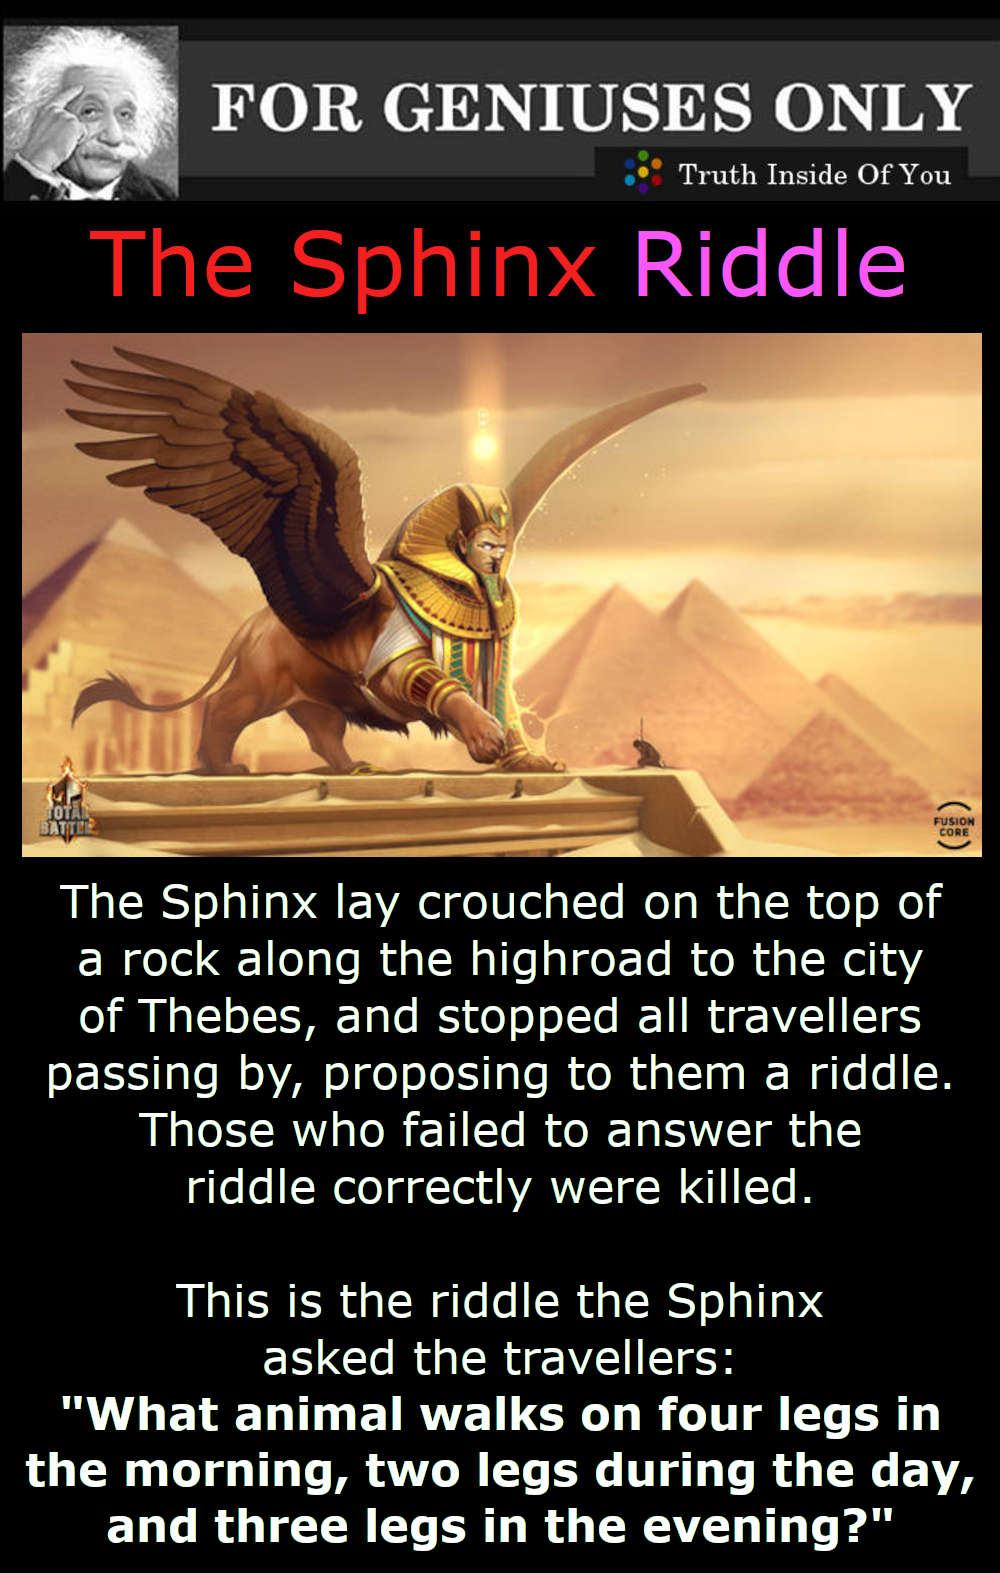 The Sphinx Riddle